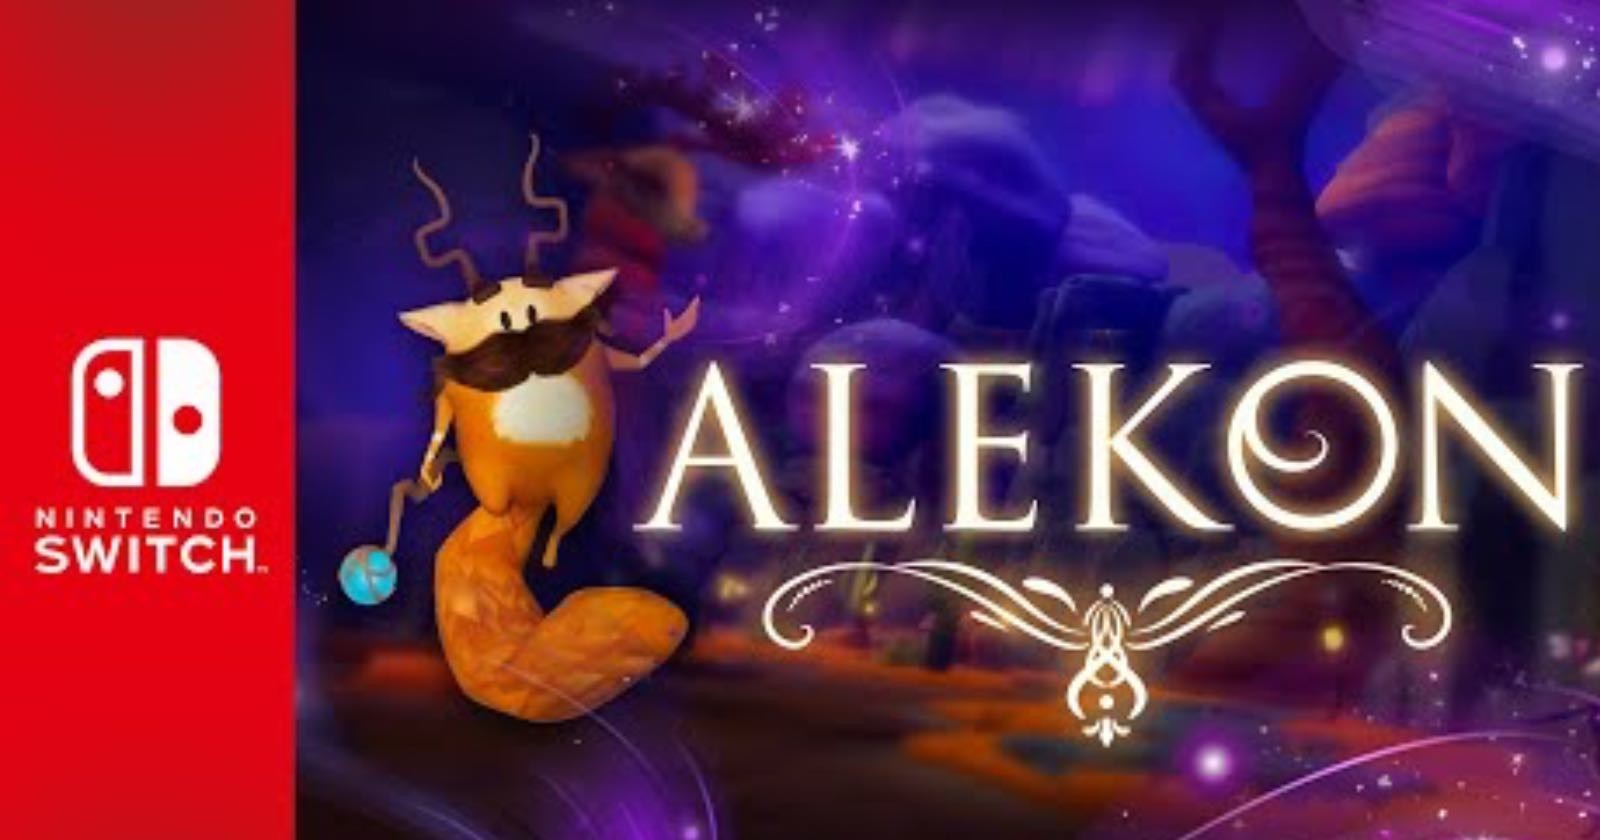 Fantasy-Inspired Photography Game Alekon is Coming to Nintendo Switch